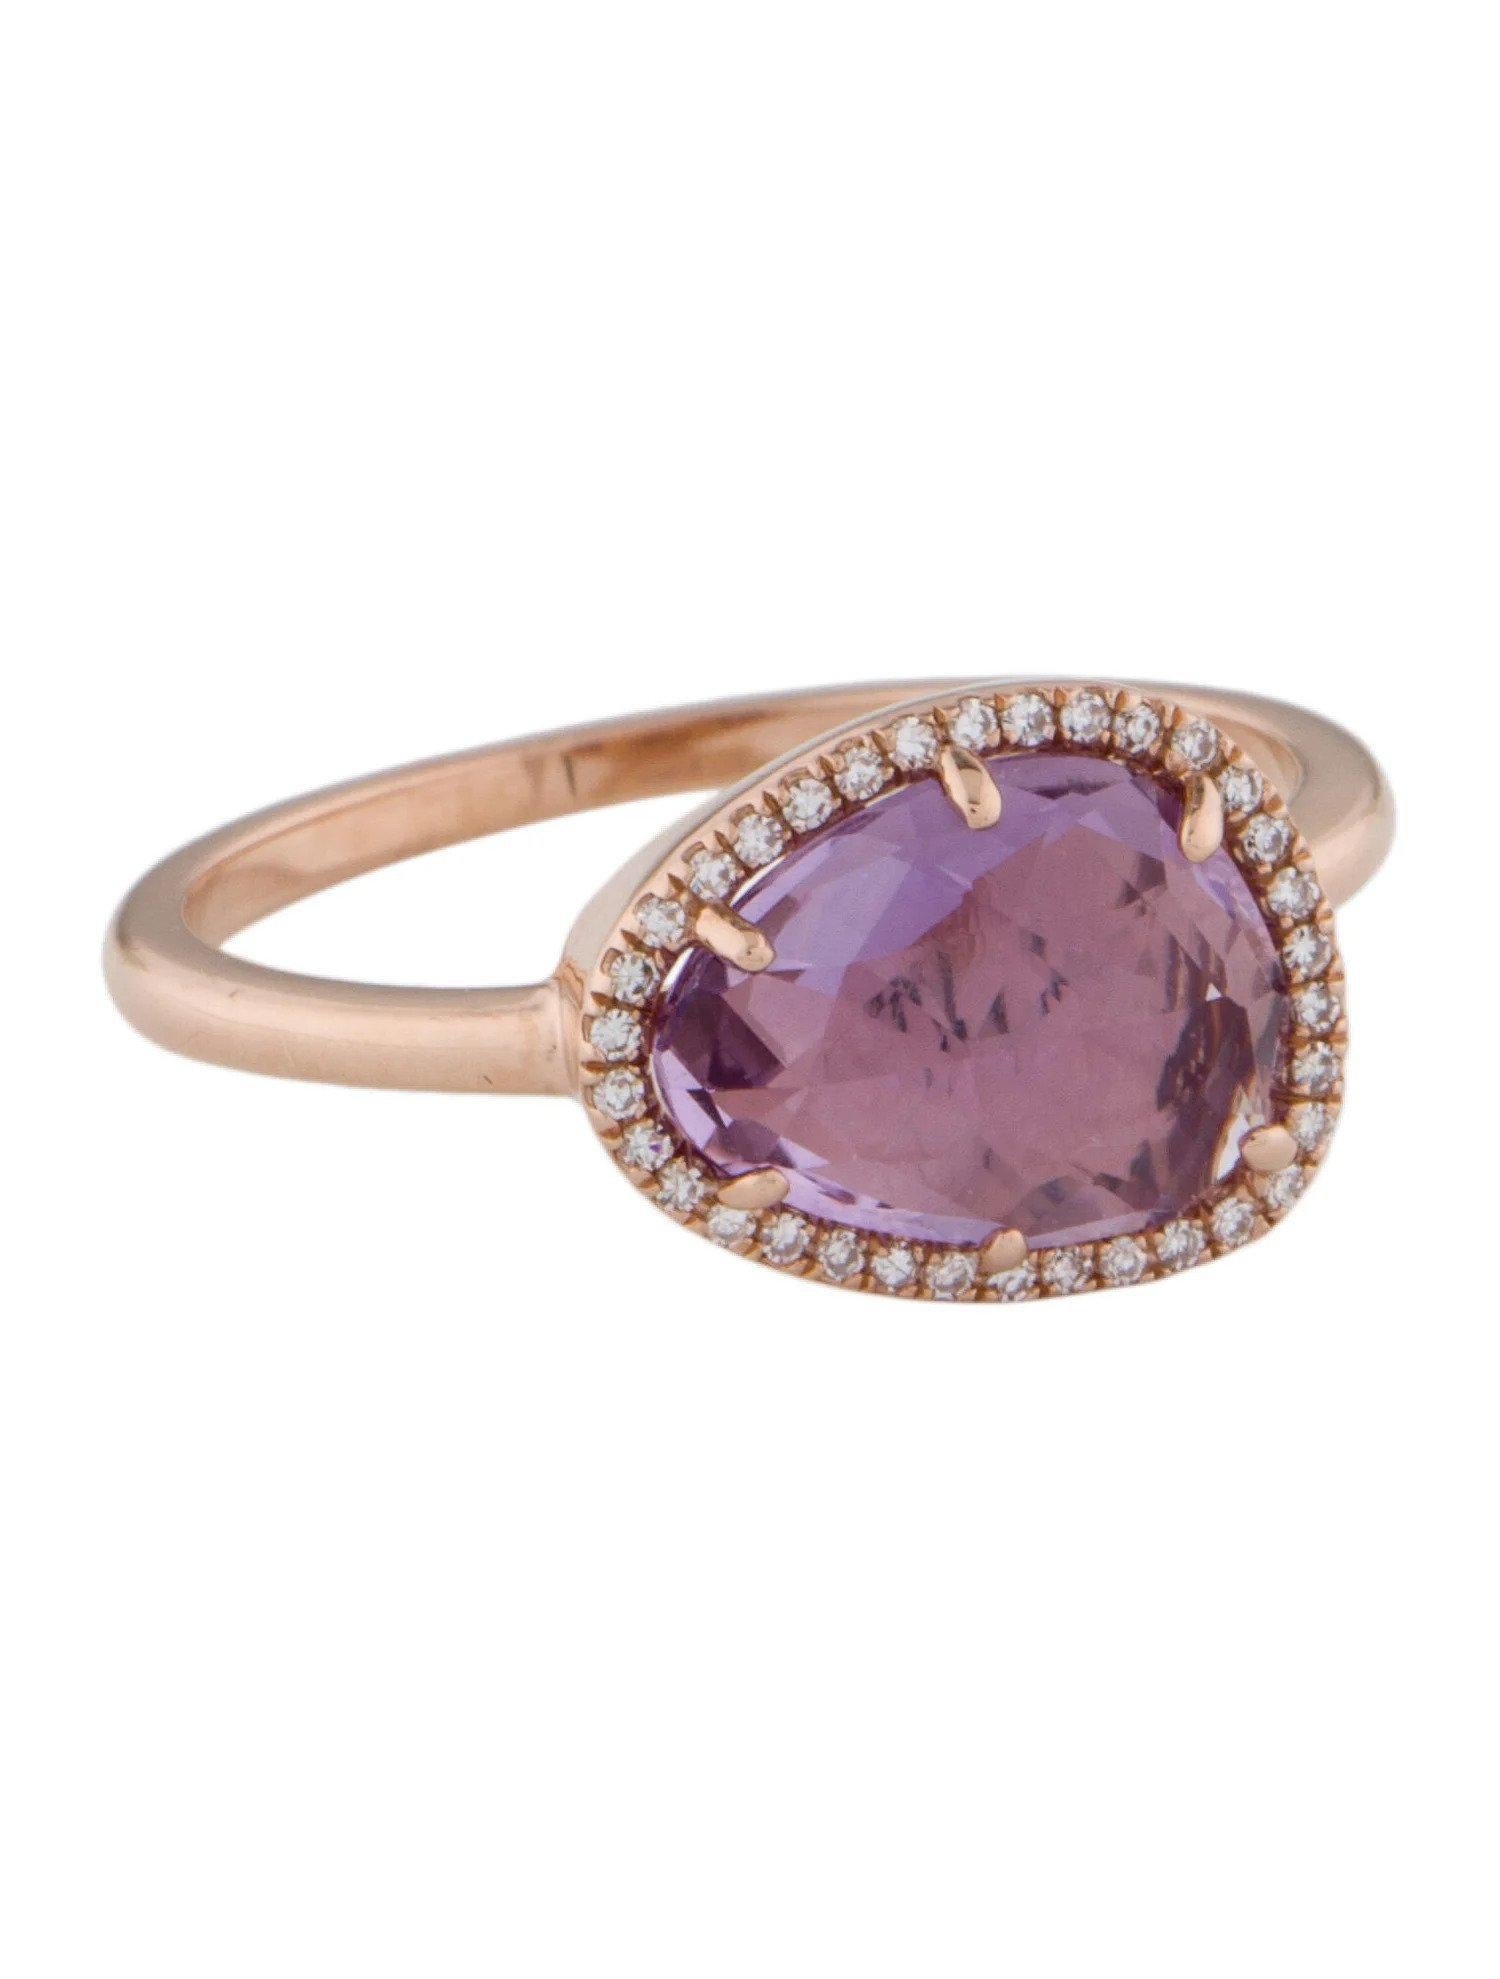 Mixed Cut 1.97 Carat Amethyst & Diamond Rose Gold Ring For Sale